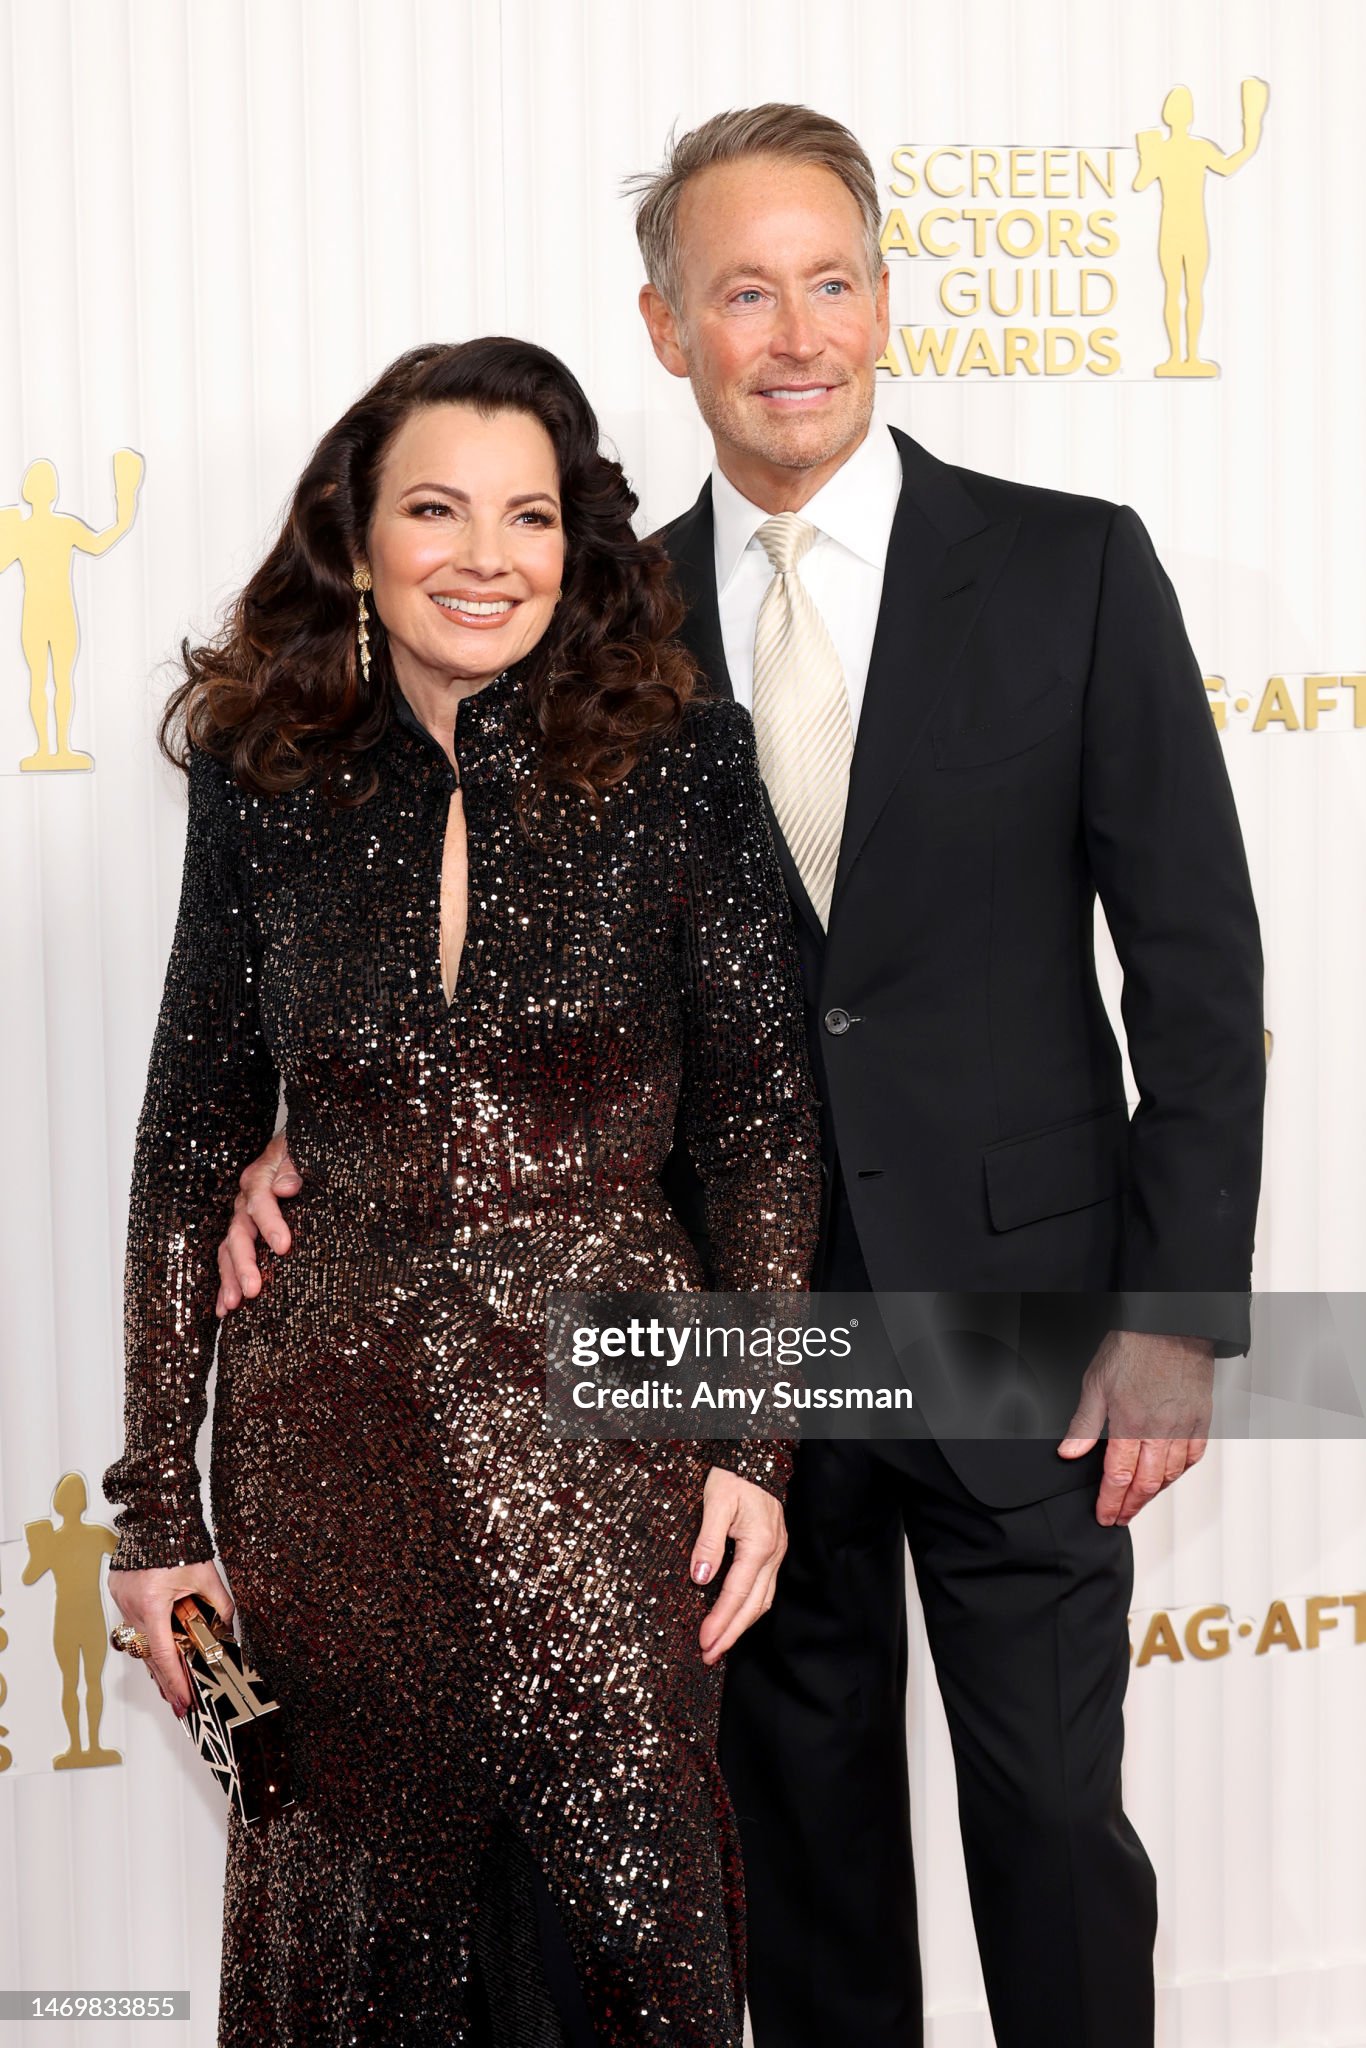 fran-drescher-president-of-sag-aftra-and-peter-marc-jacobson-attend-the-29th-annual-screen.jpg